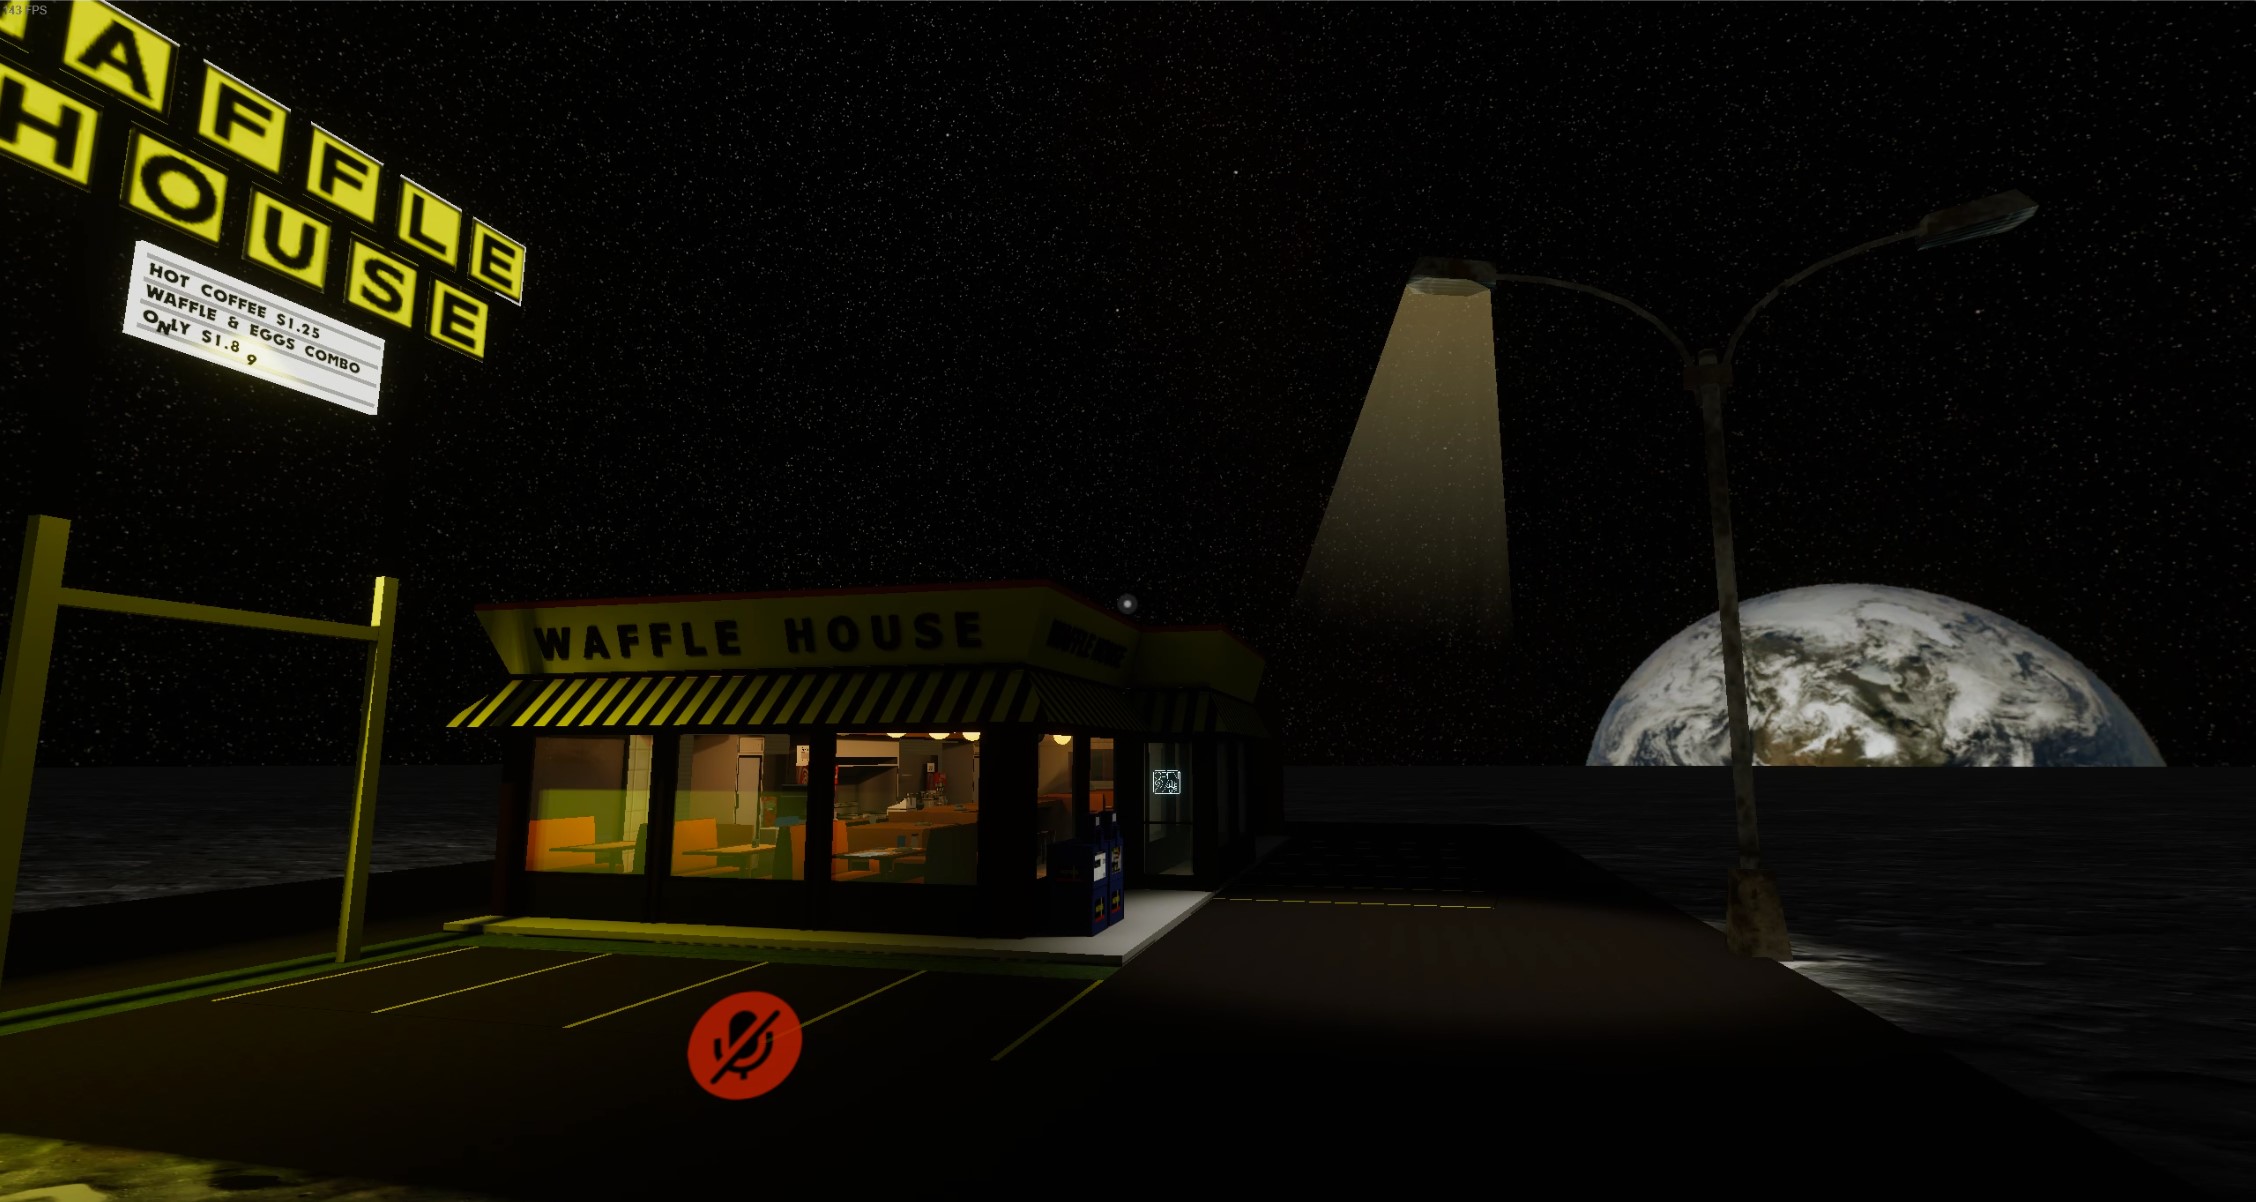 The Waffle House on the Moon